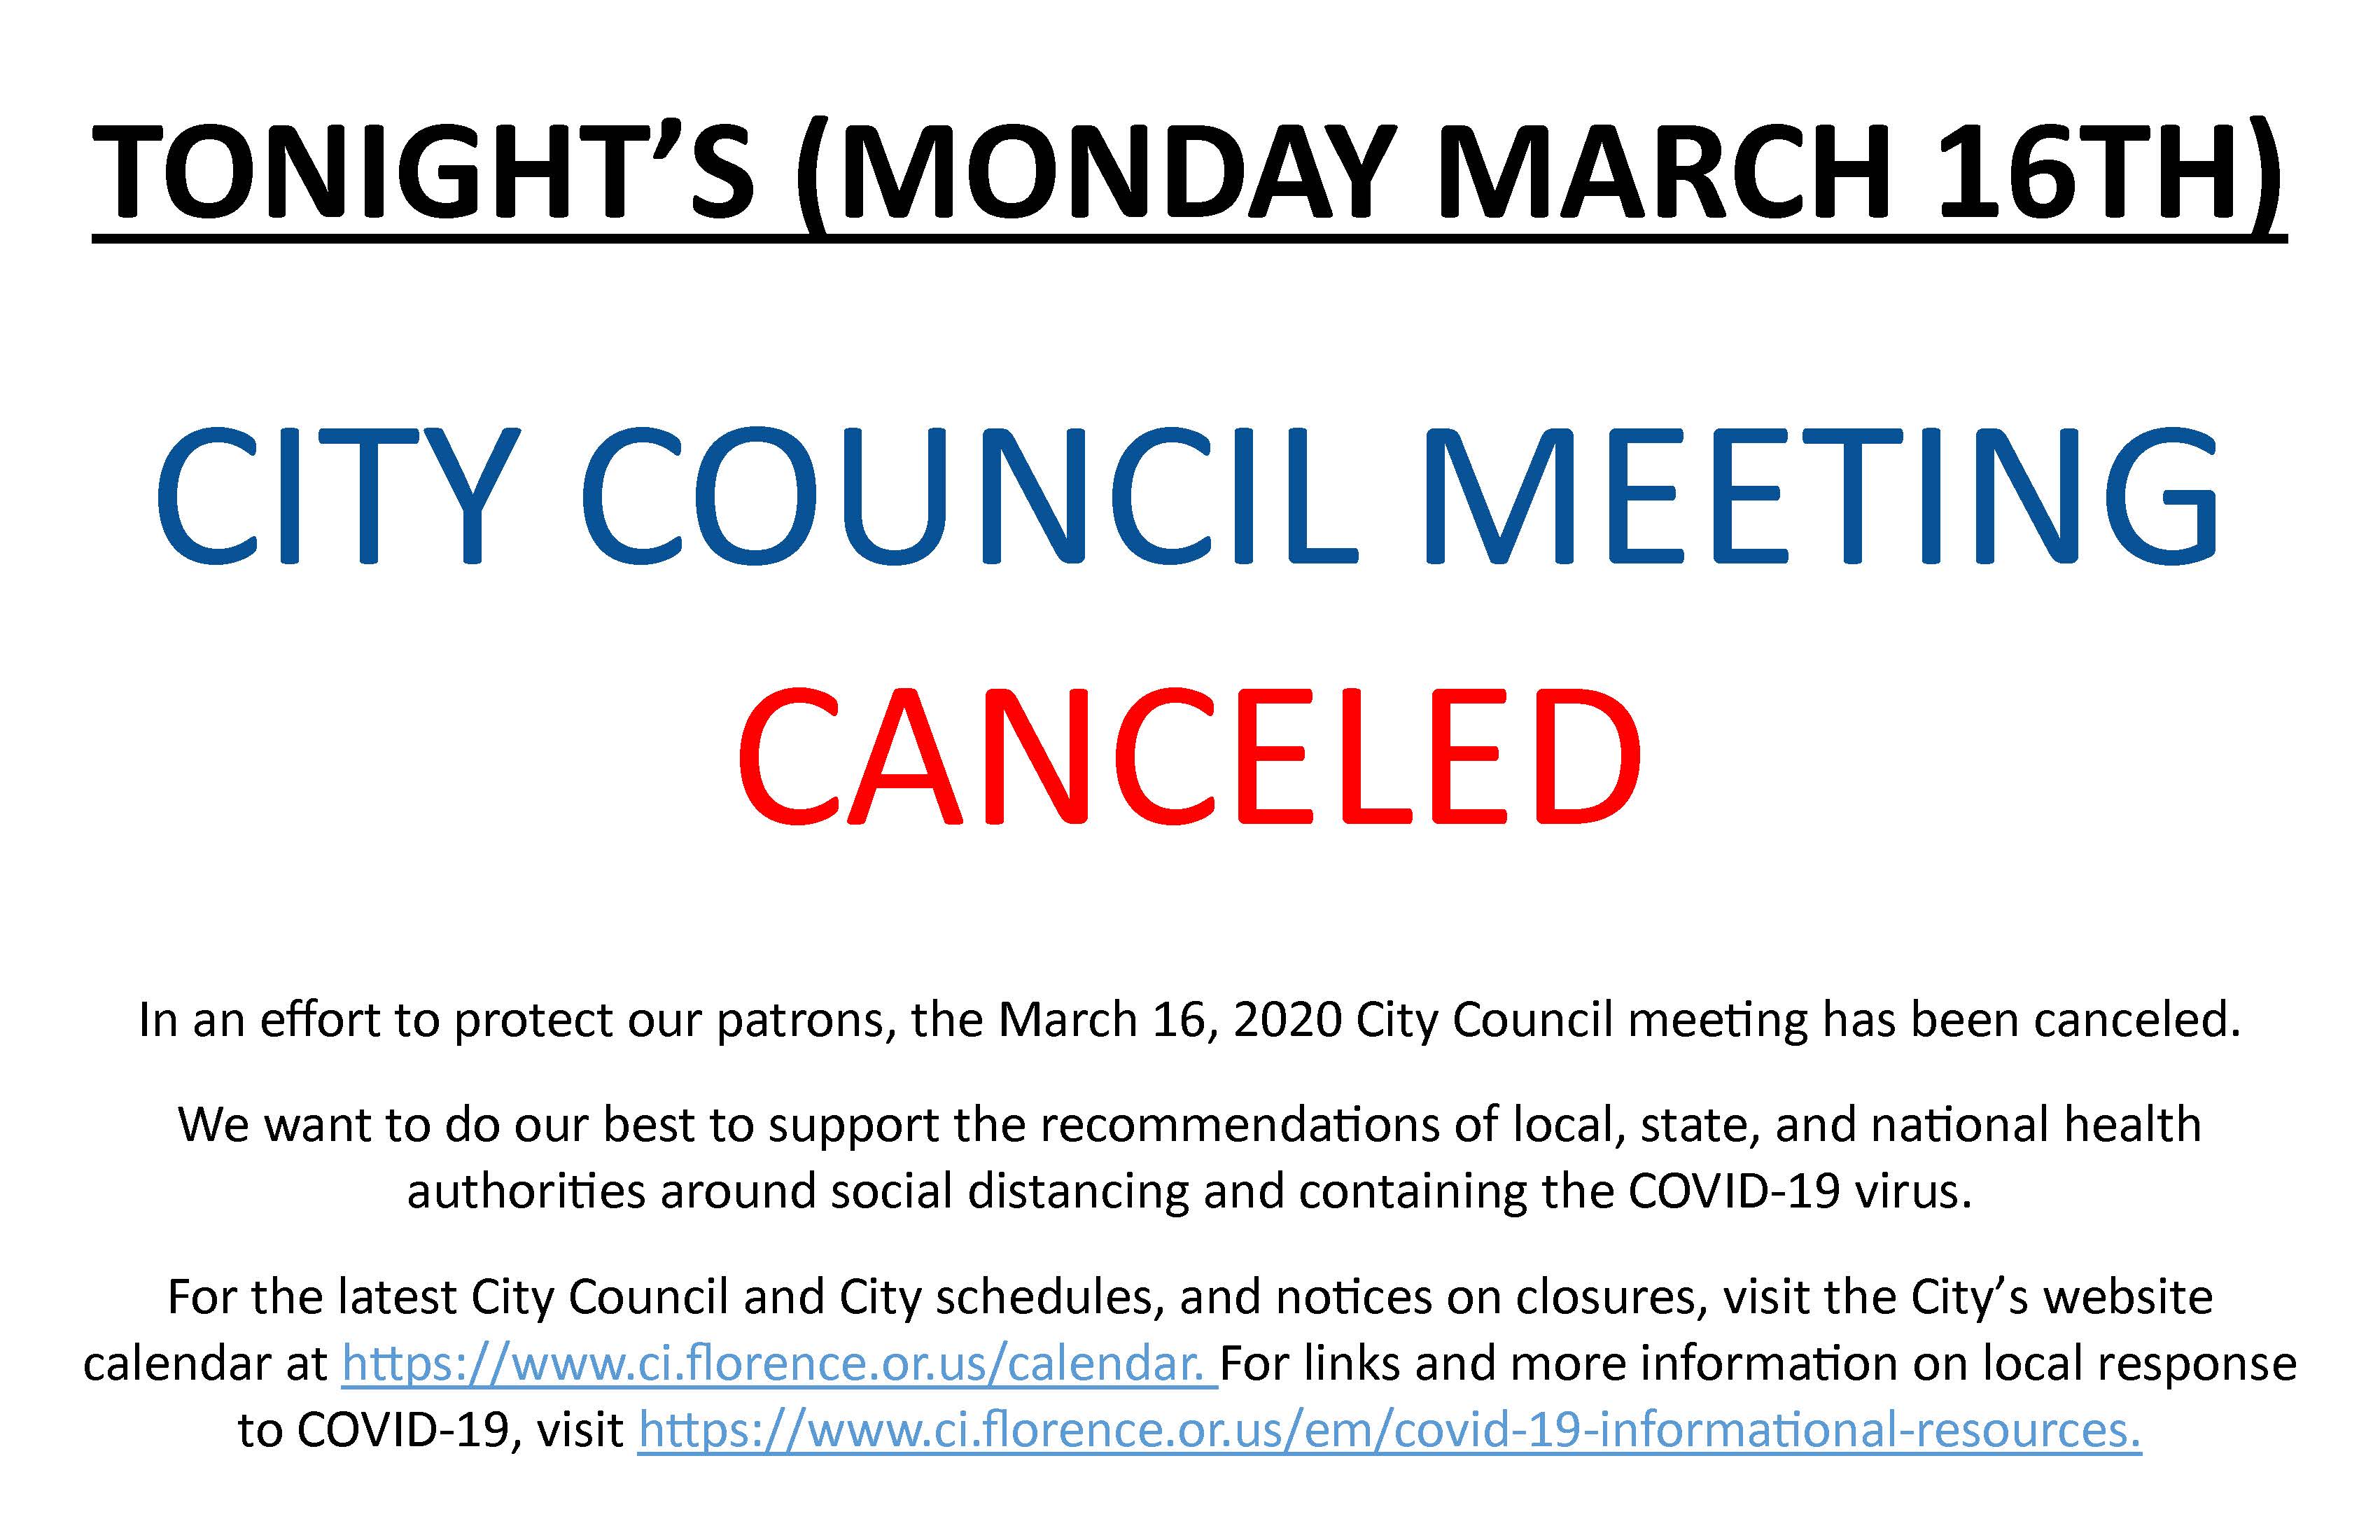 City Council Meeting Canceled